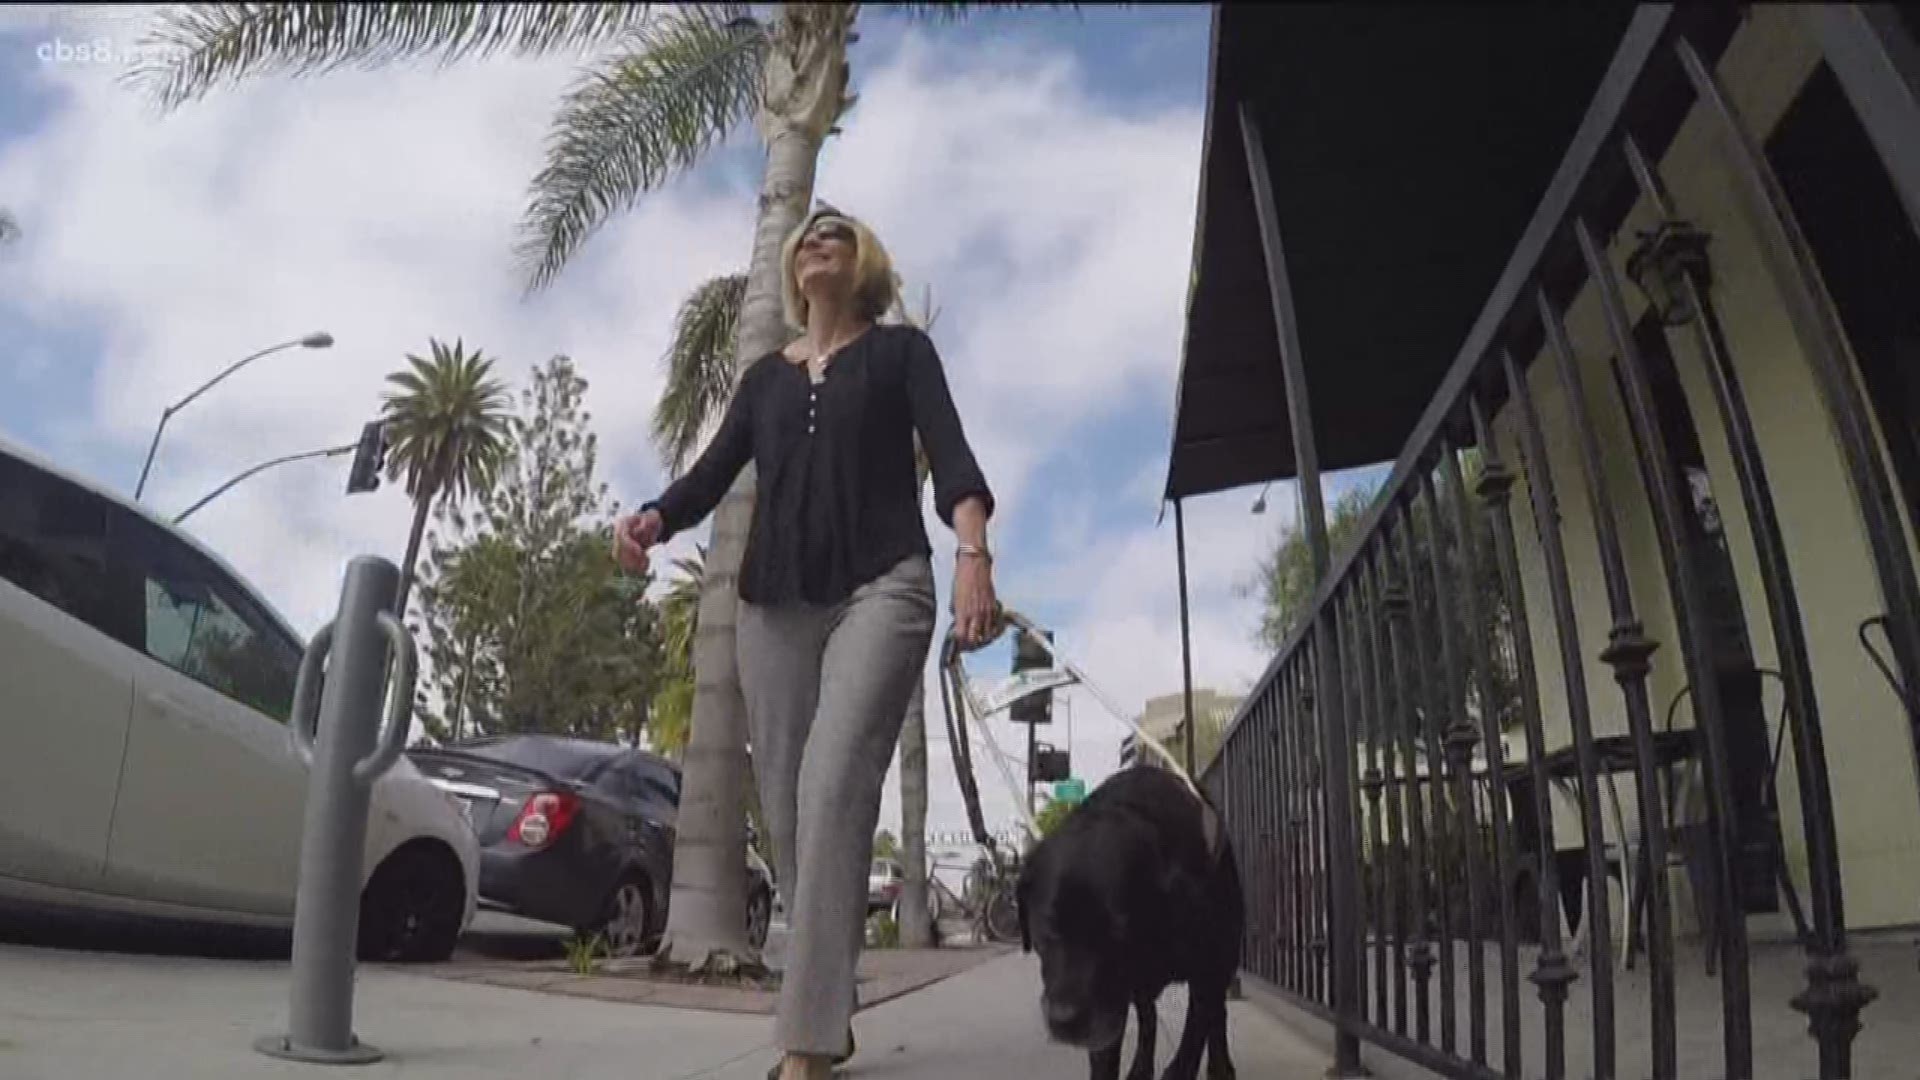 For Kelly Egan and her guide dog, Hope, a simple task like crossing the street can be very scary.